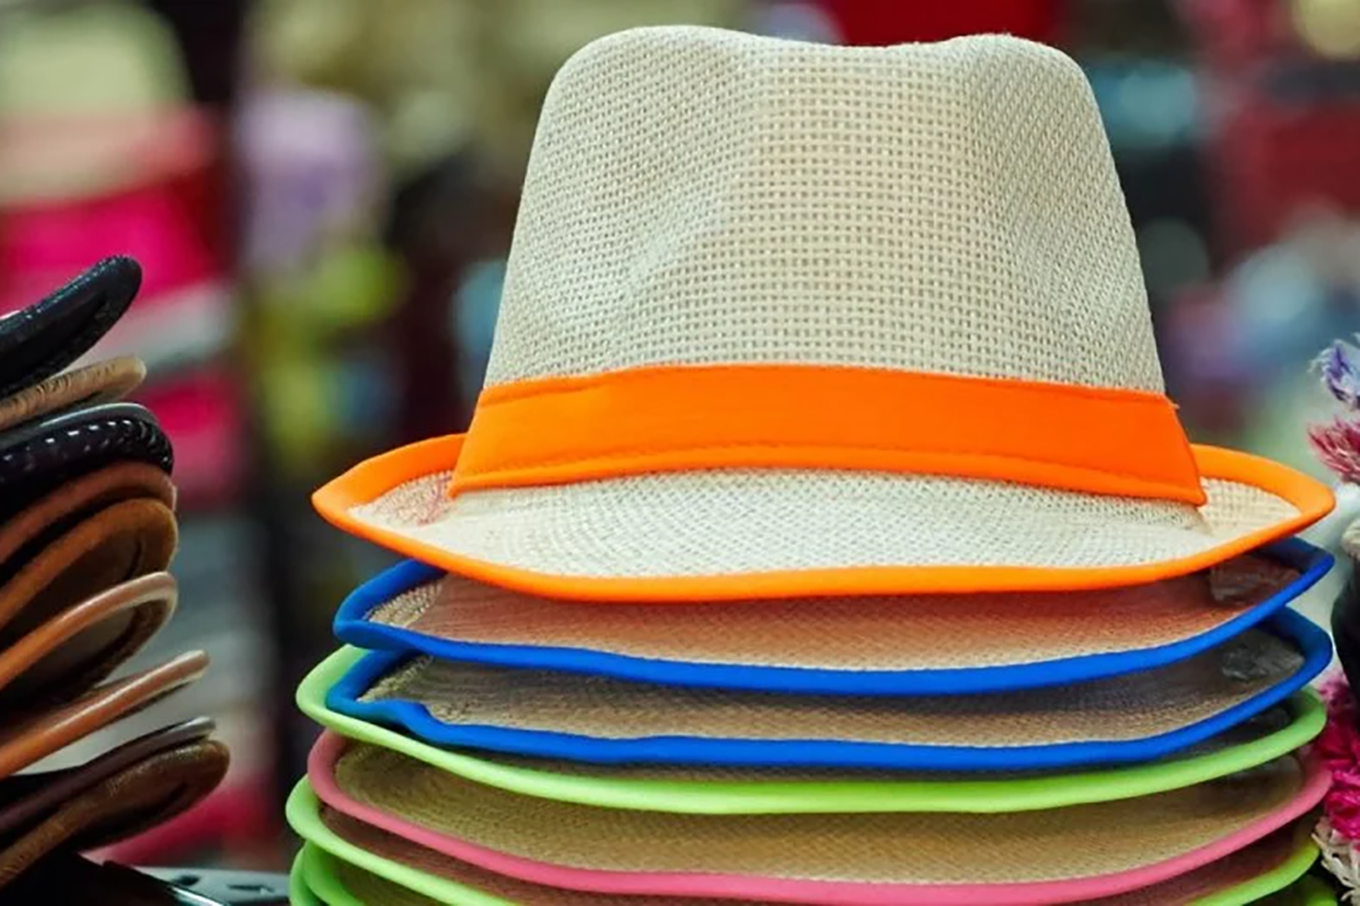 Six Thinking Hats® - Looking at a Decision in Different Ways